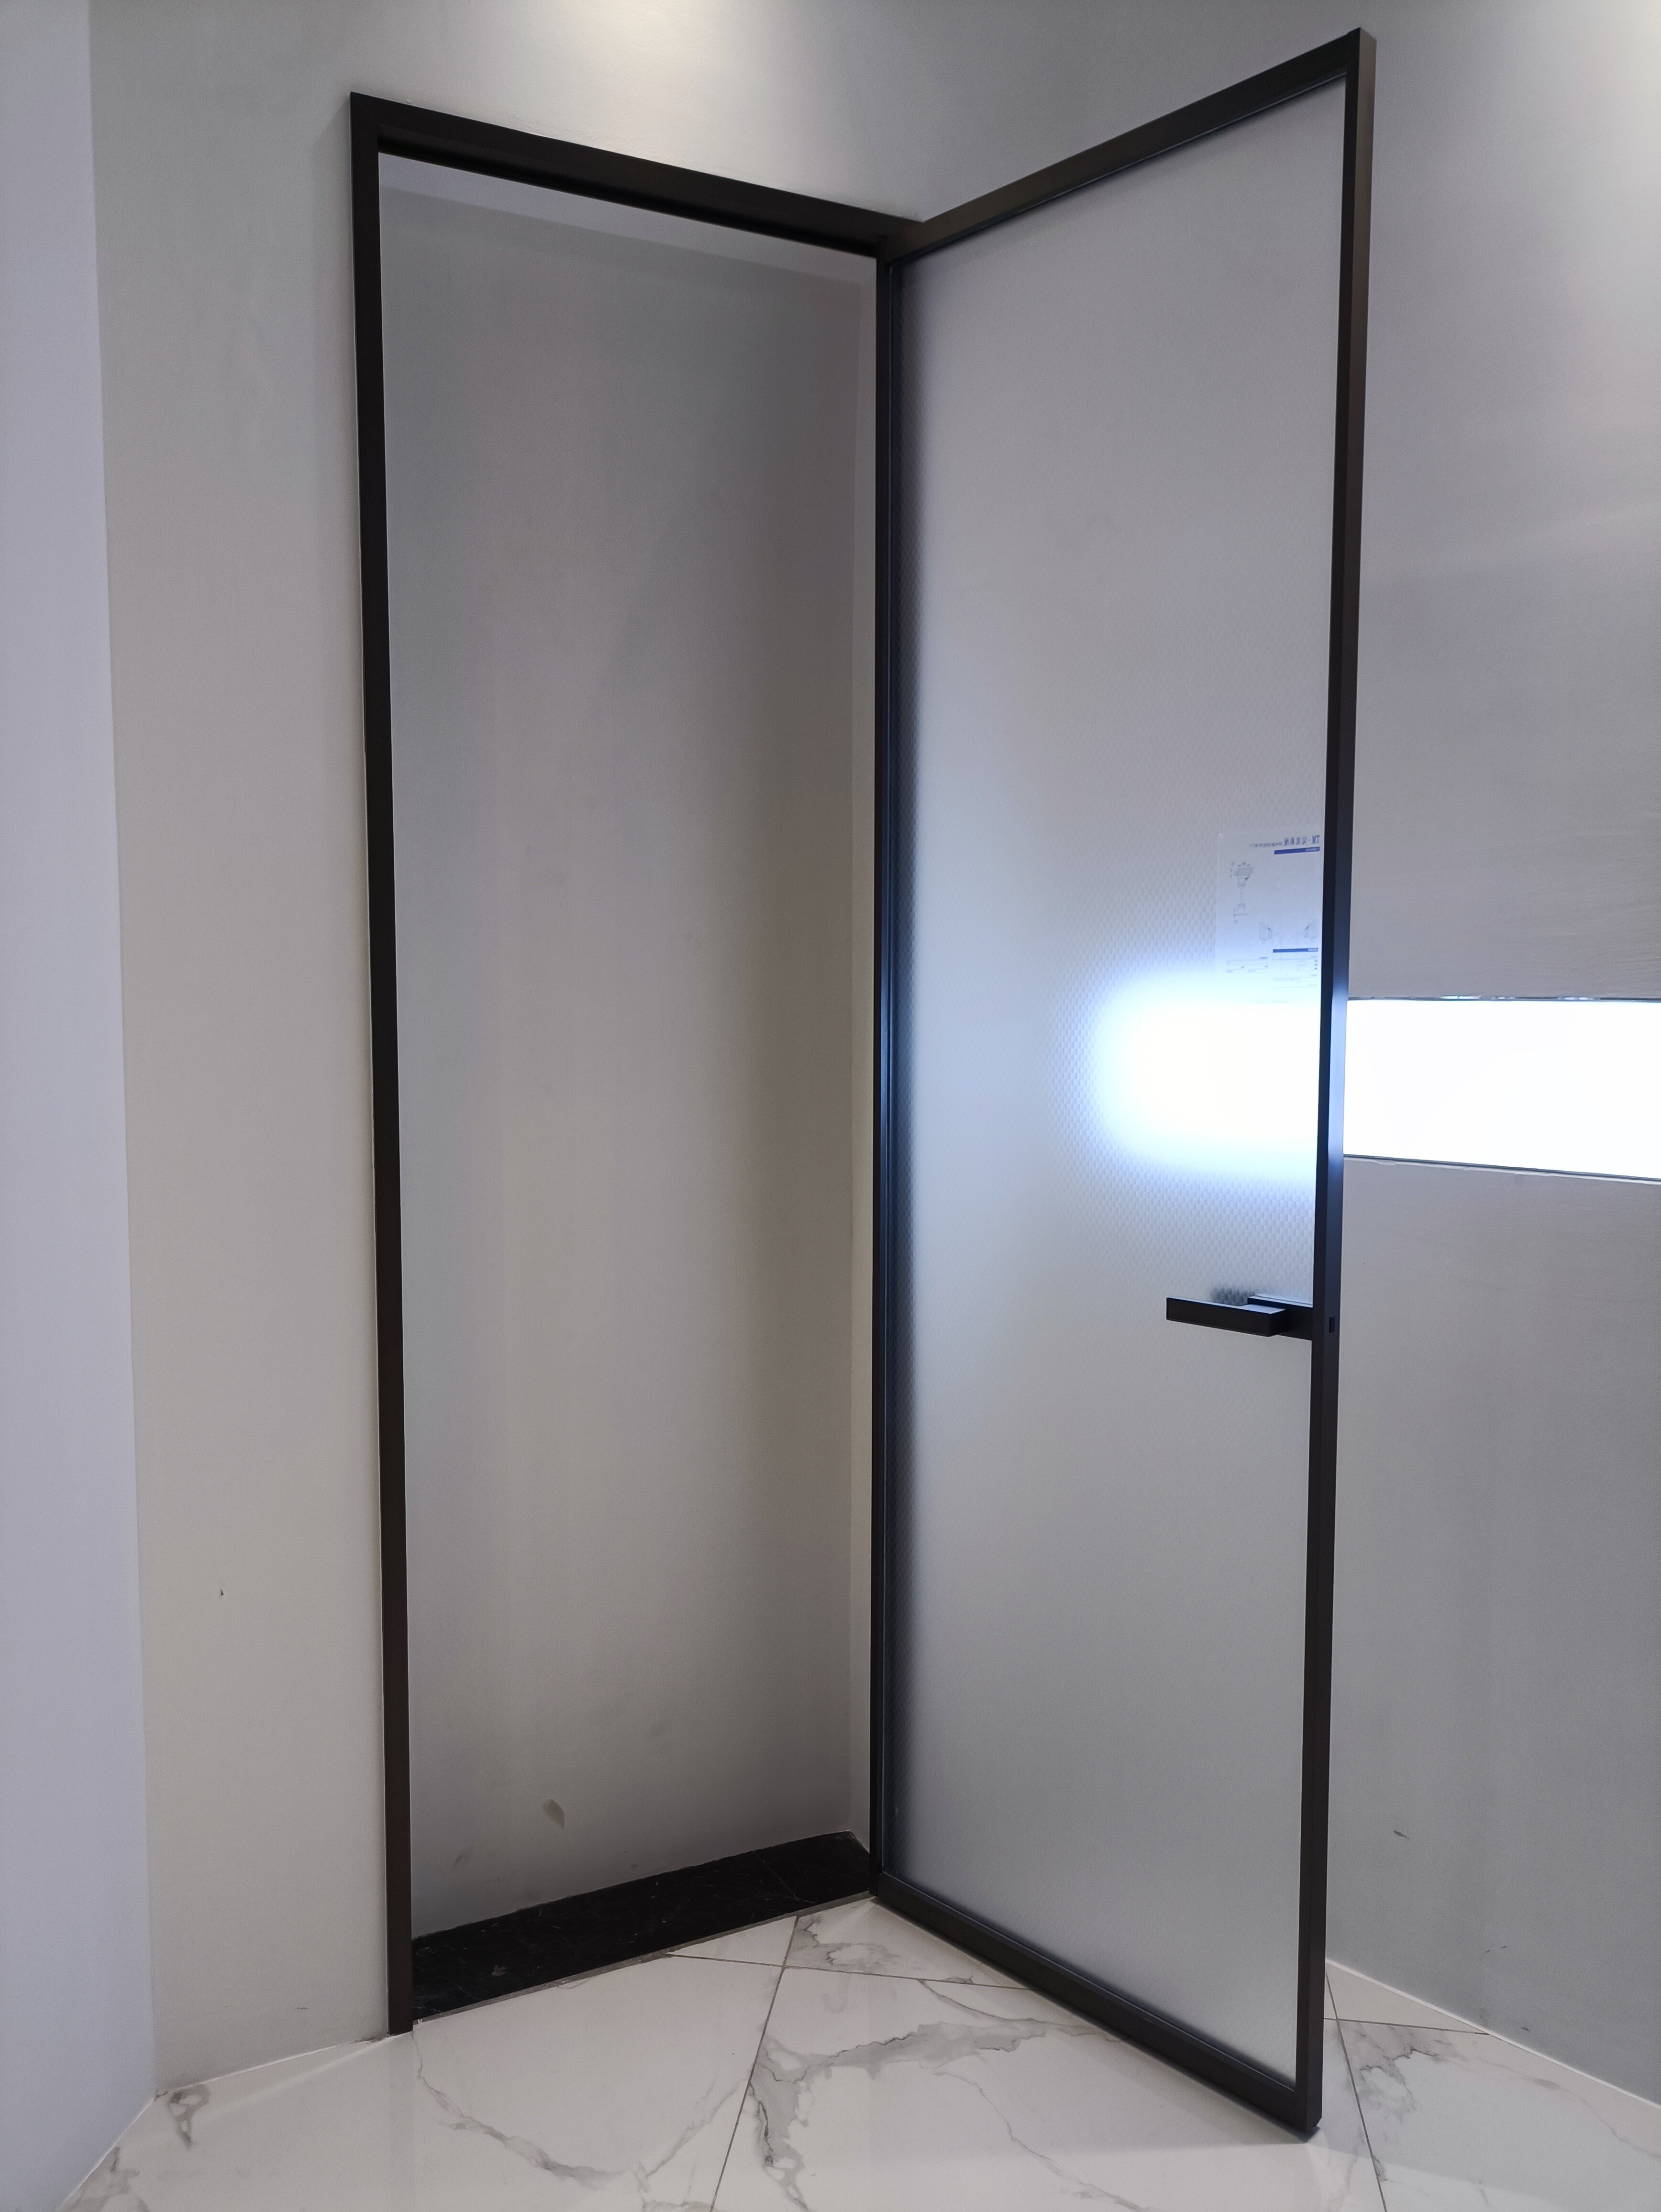 Perfect System Swing Door Application uses an aluminum profile combination